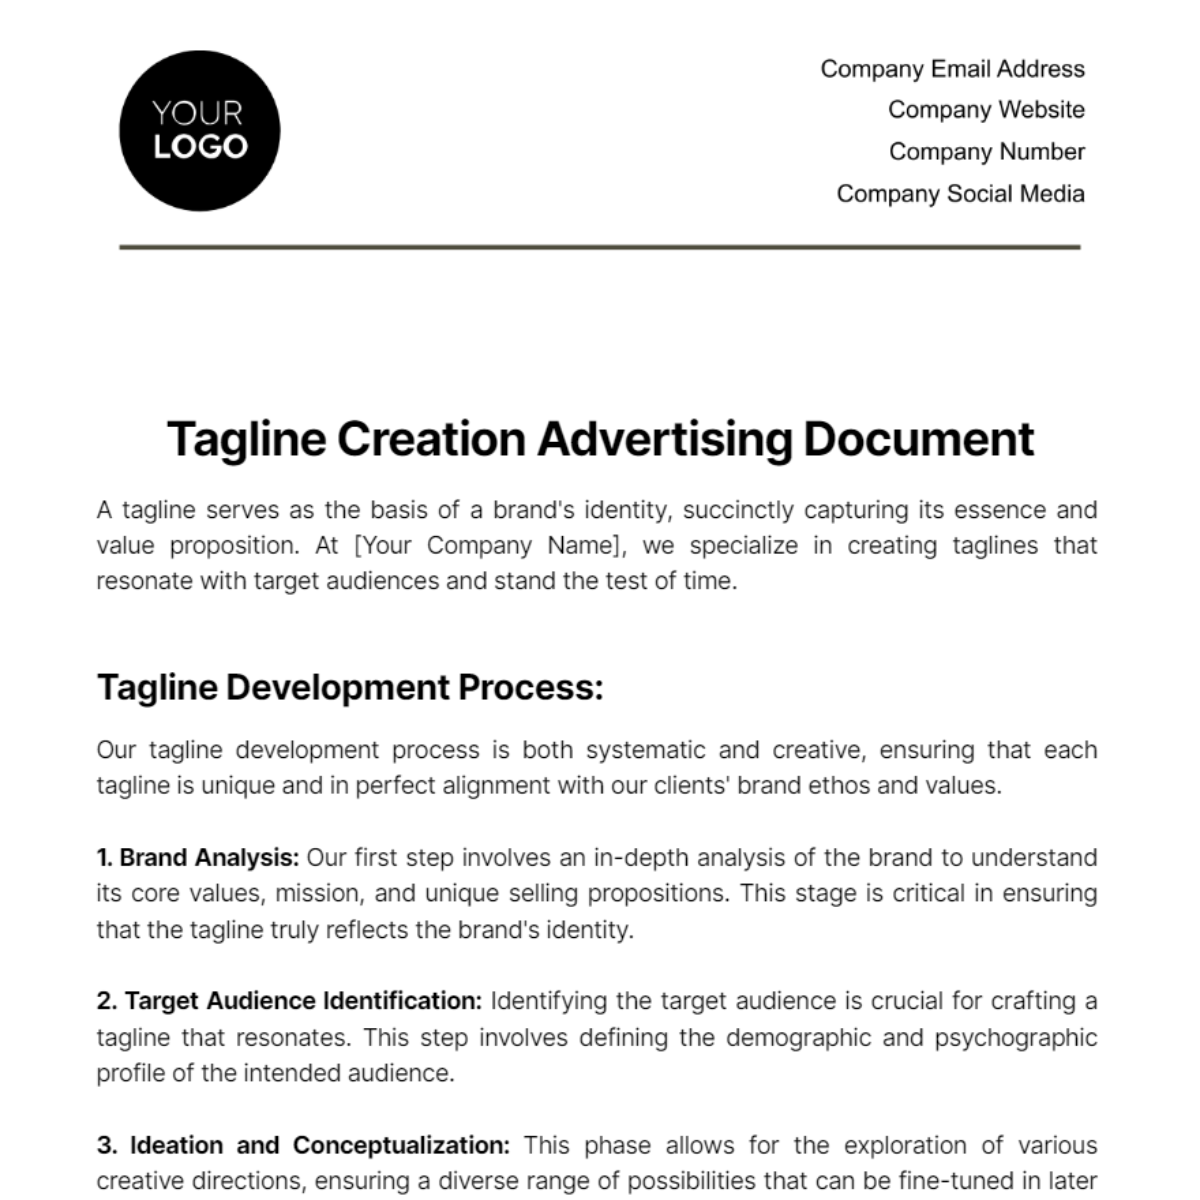 Free Tagline Creation Advertising Document Template